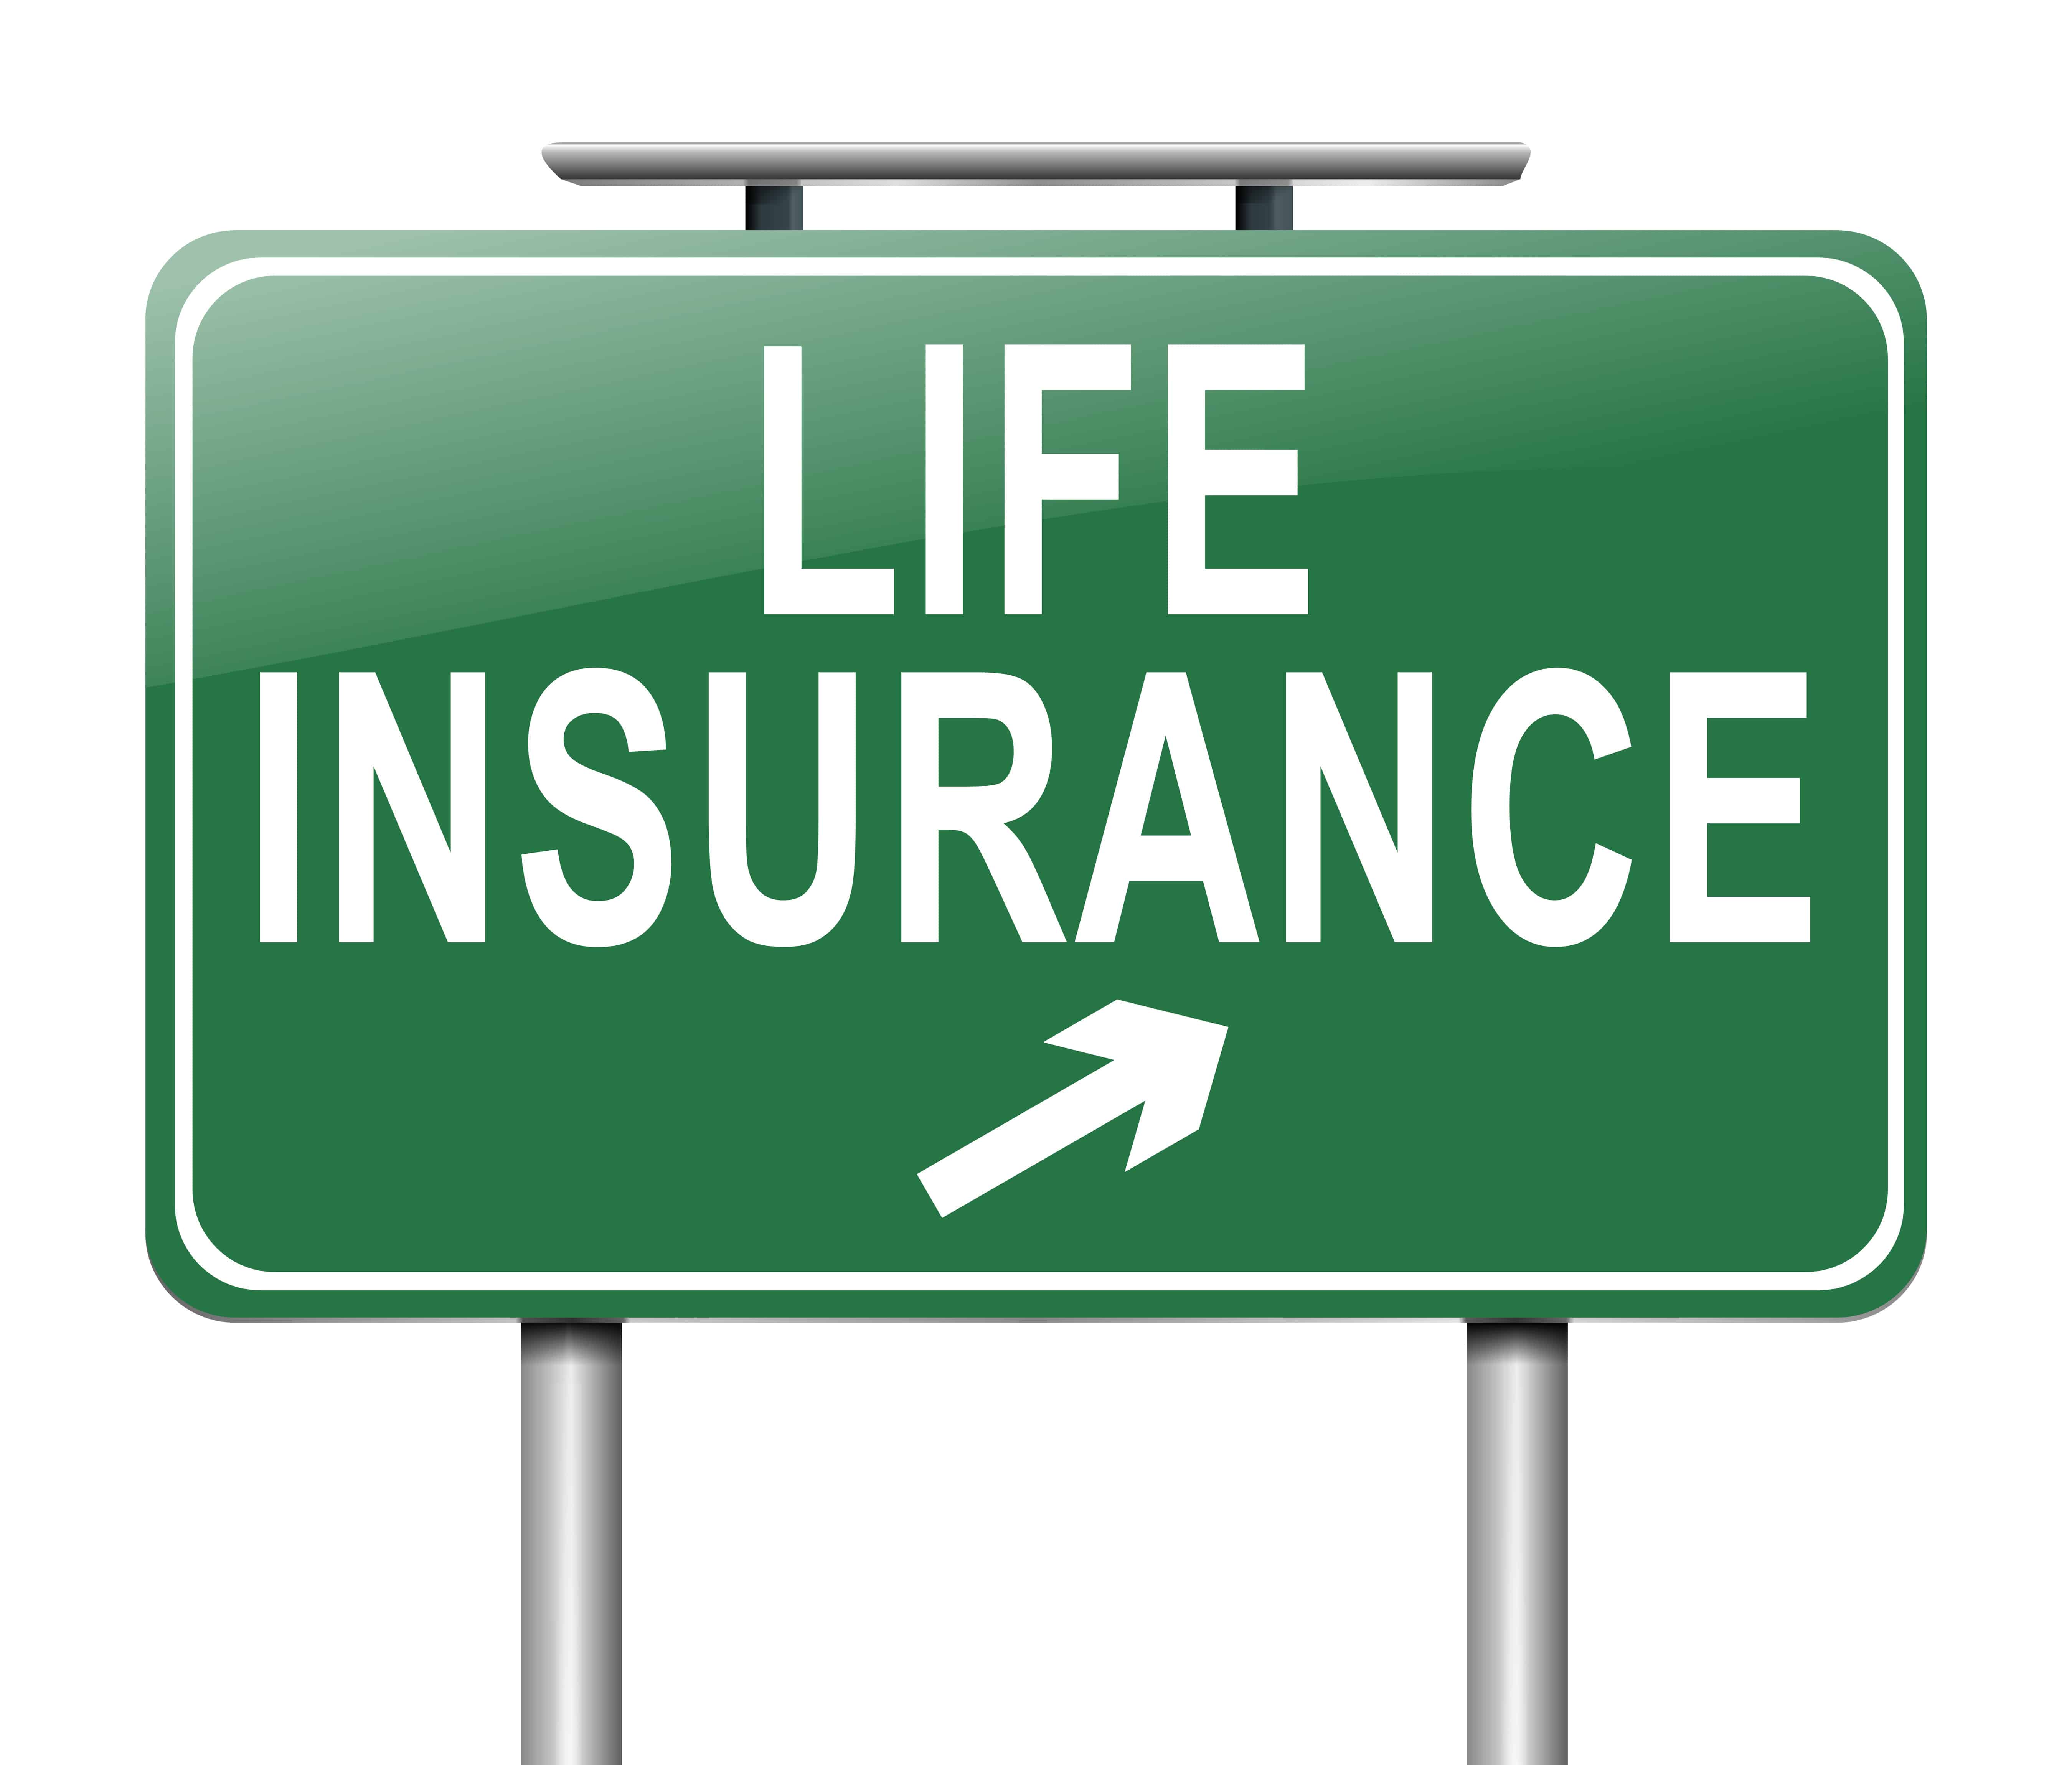 Buying Life Insurance is a Wise Financial Decision | Fiscally Sound